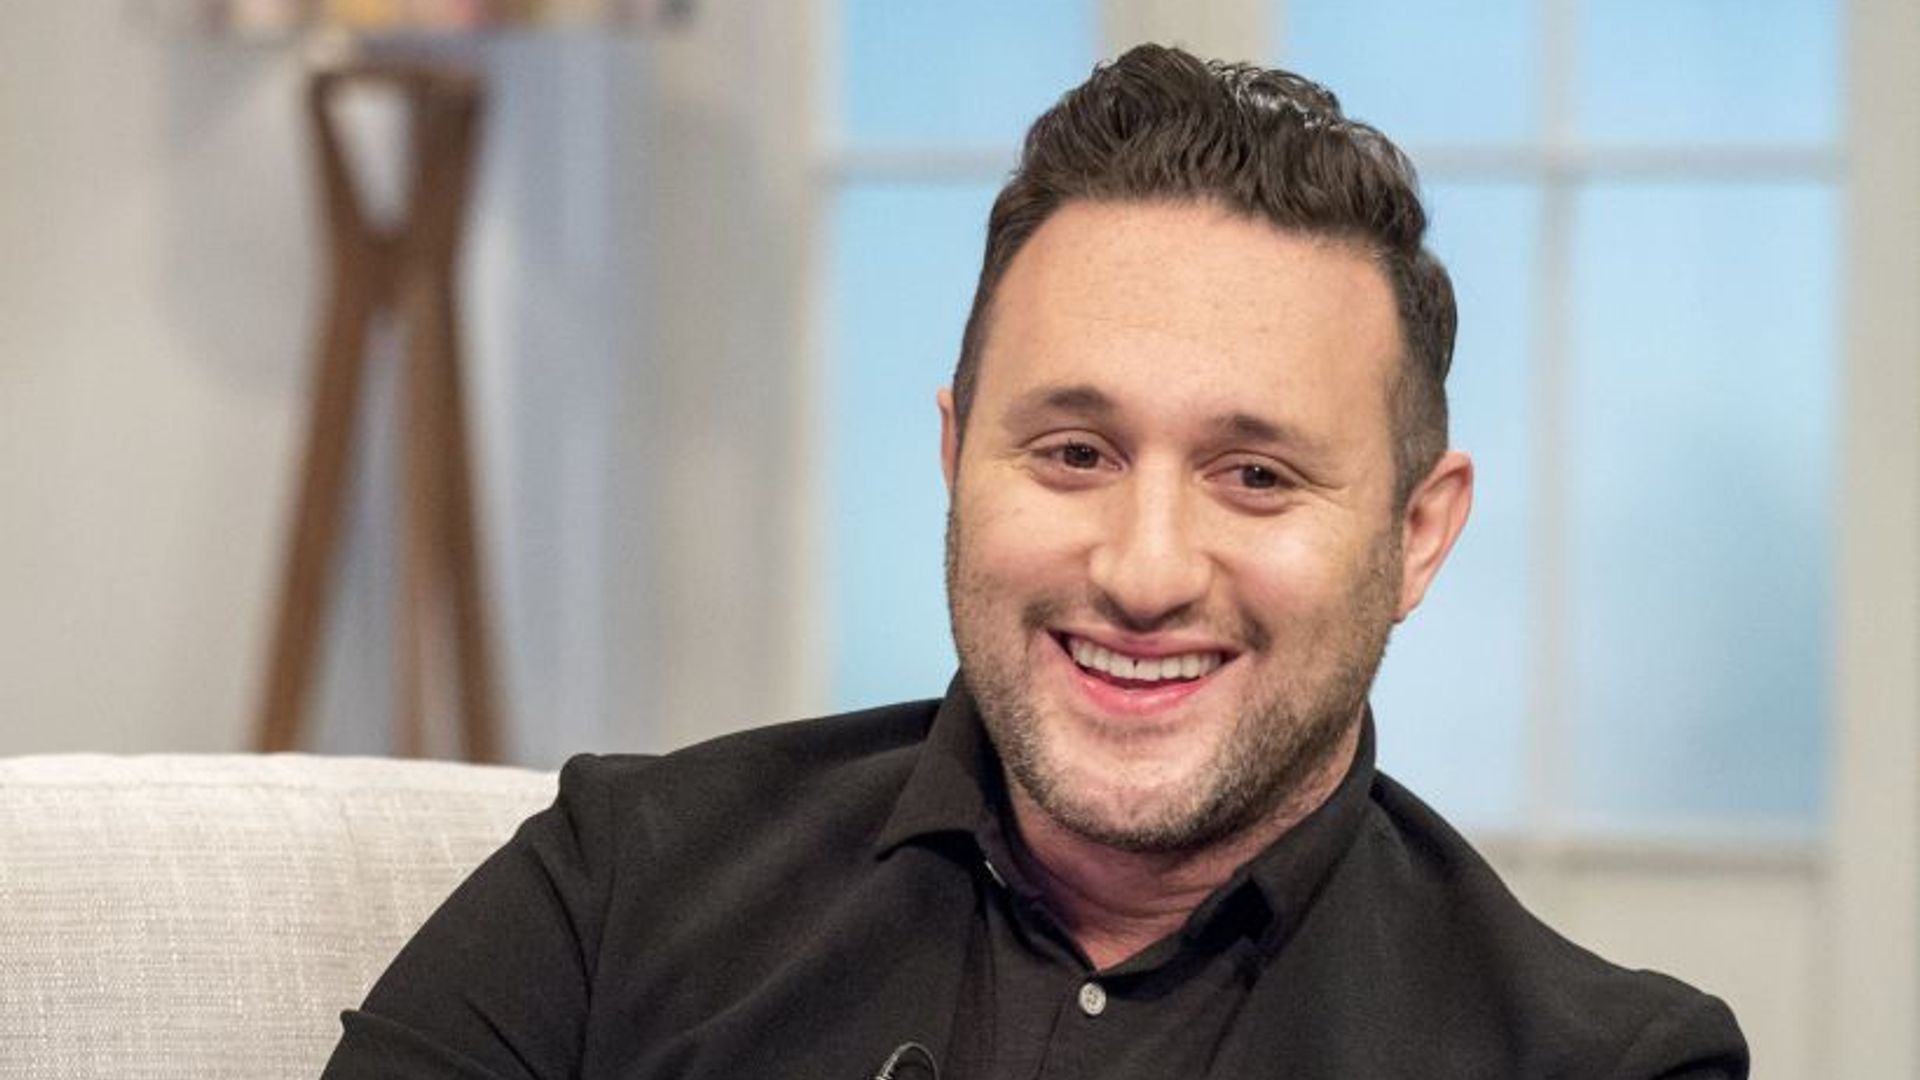 Blue singer Antony Costa looks incredible after 16lbs weight loss in 4 weeks